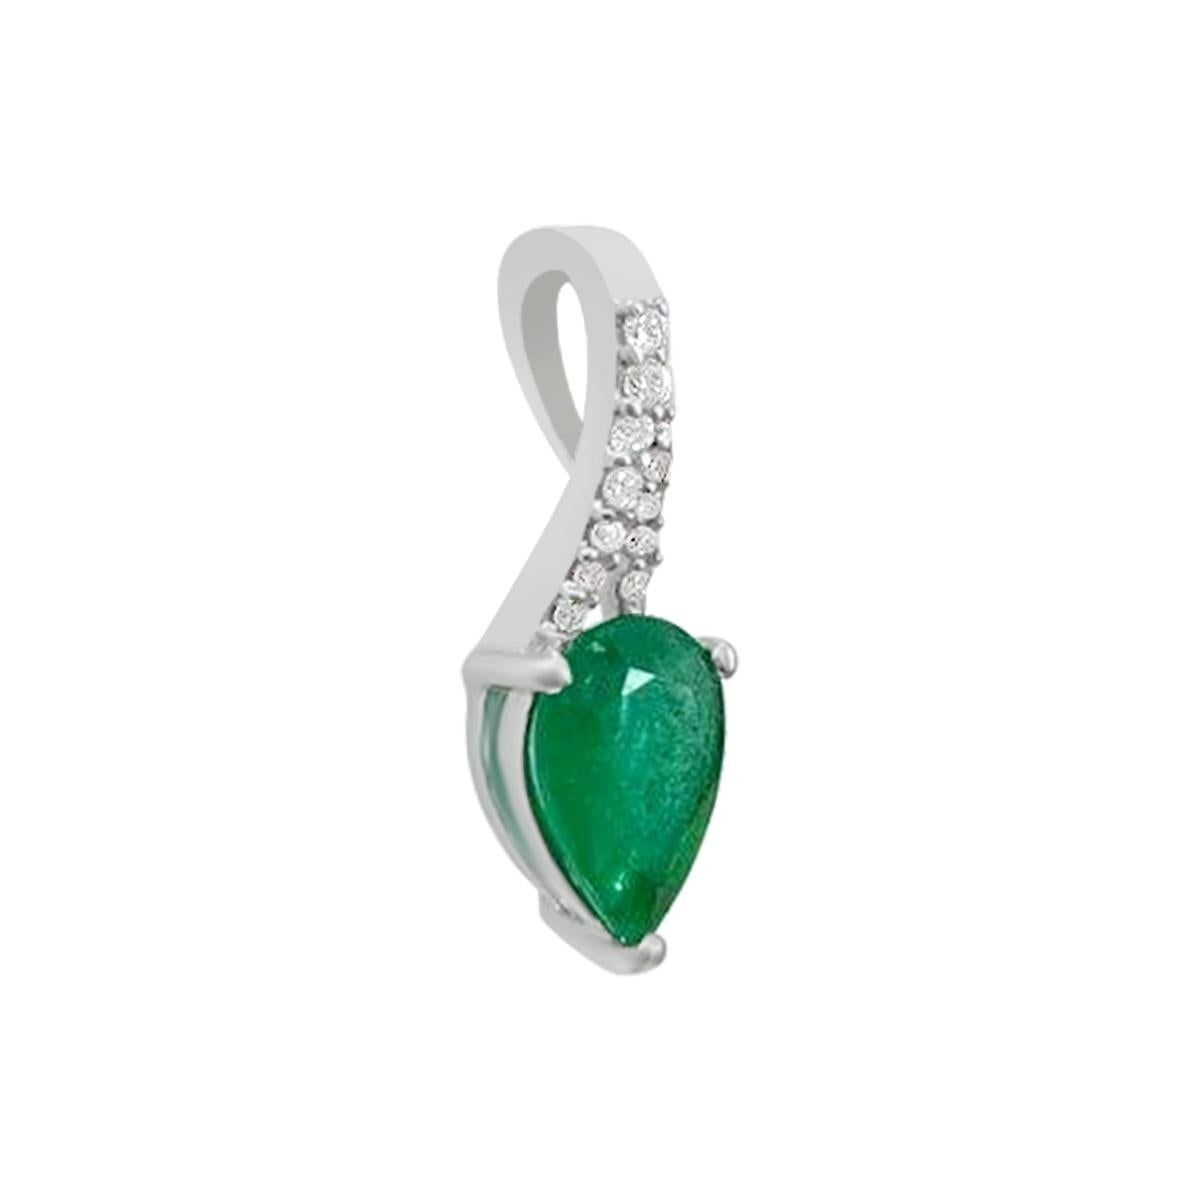 This Marvelous Pendant Is Enough To Elevate Your Luxury Look For Any Occasion ,
Decorated With A Spectacular Pear Cut 8X6mm Emerald Gemstone, This Shining Piece Jewelry Is Surrounded By Diamonds. This Beautiful Emerald Pendant Is Crafted In 18K